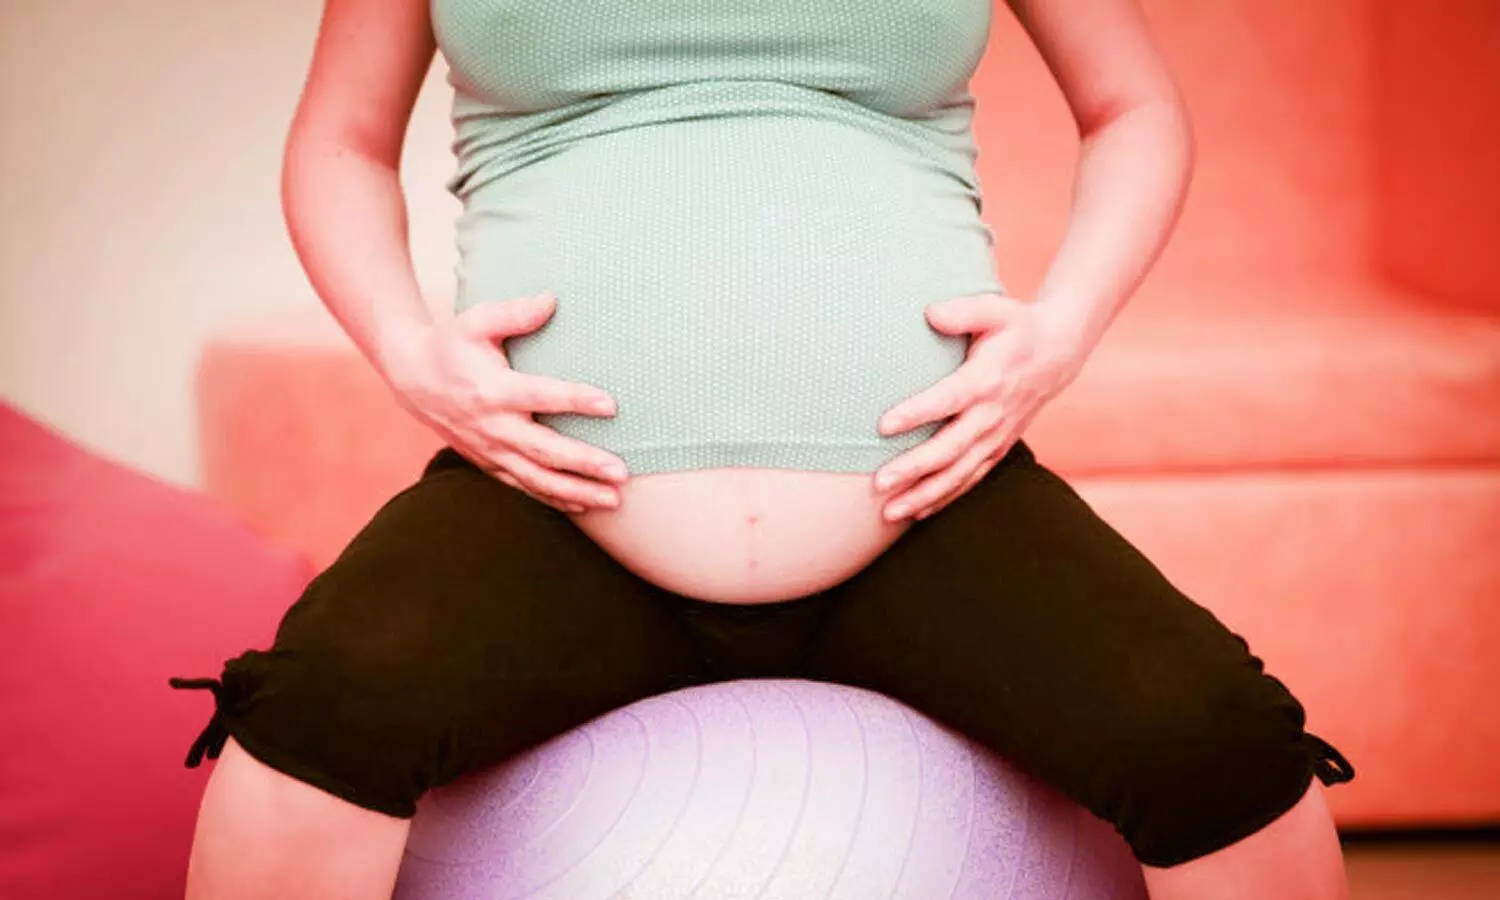 Exercise during pregnancy may save kids from health problems as adults